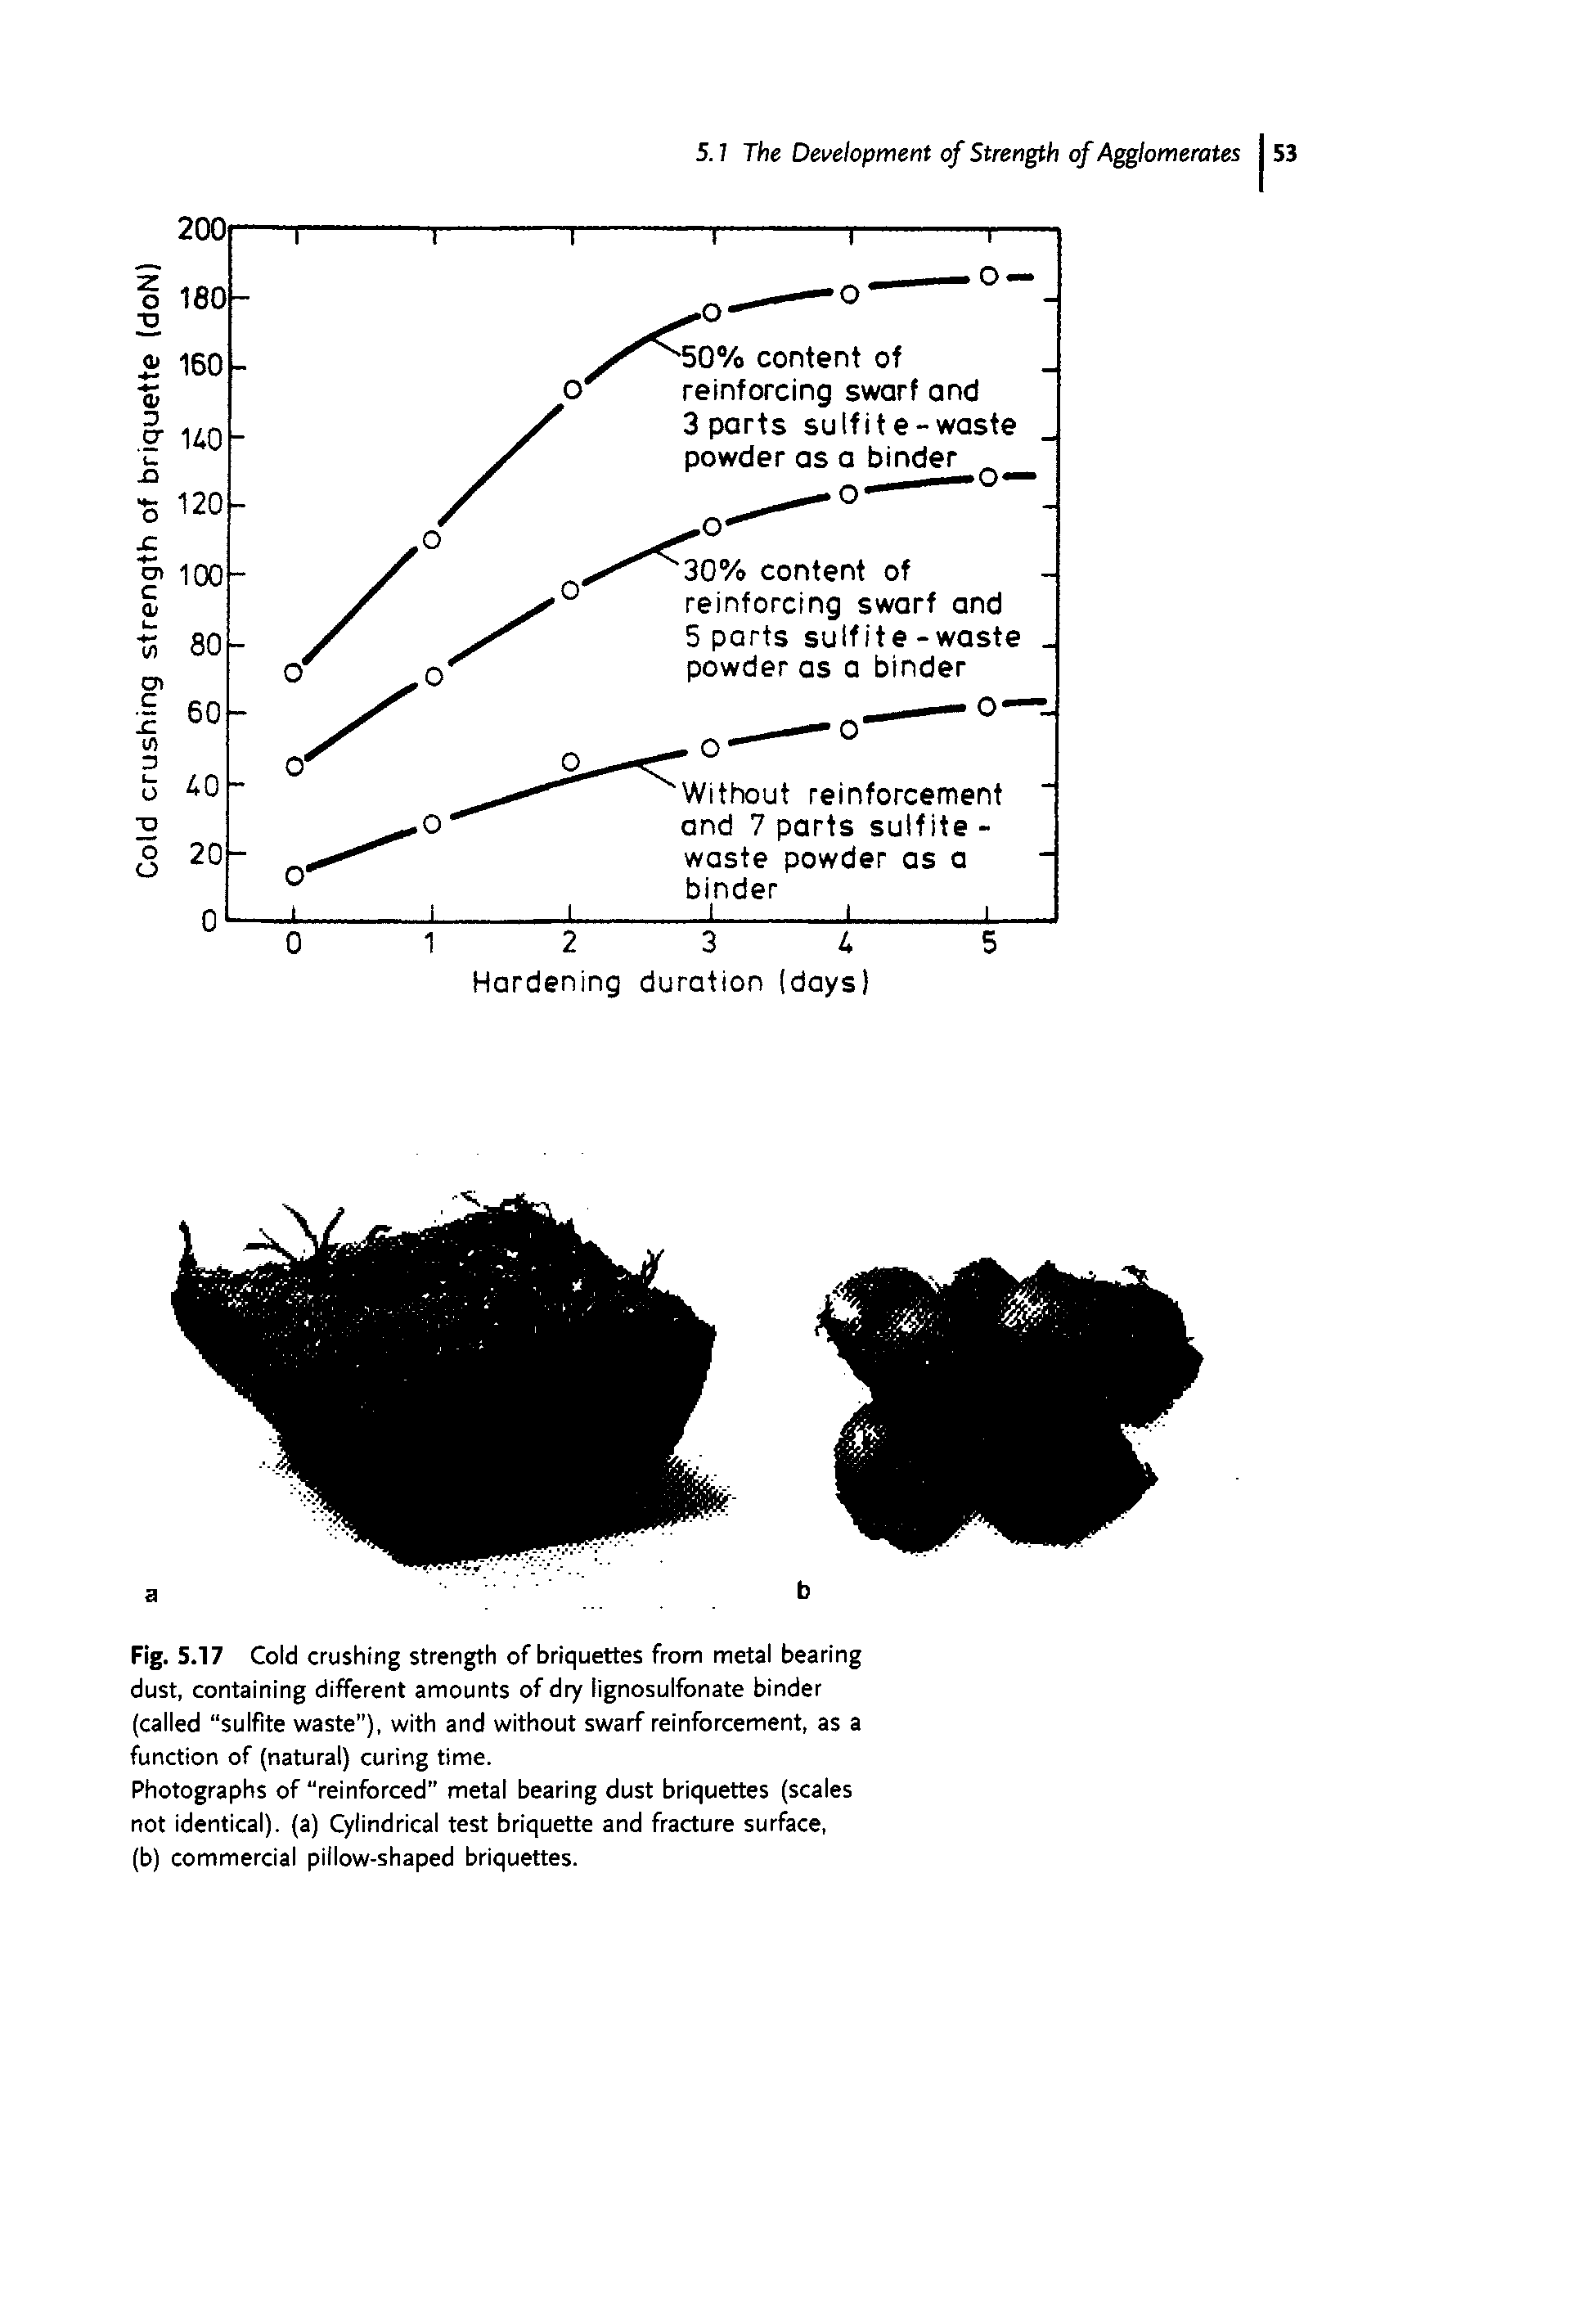 Fig. 5.17 Cold crushing strength of briquettes from metal bearing dust, containing different amounts of dry lignosulfonate binder (called sulfite waste ), with and without swarf reinforcement, as a function of (natural) curing time.